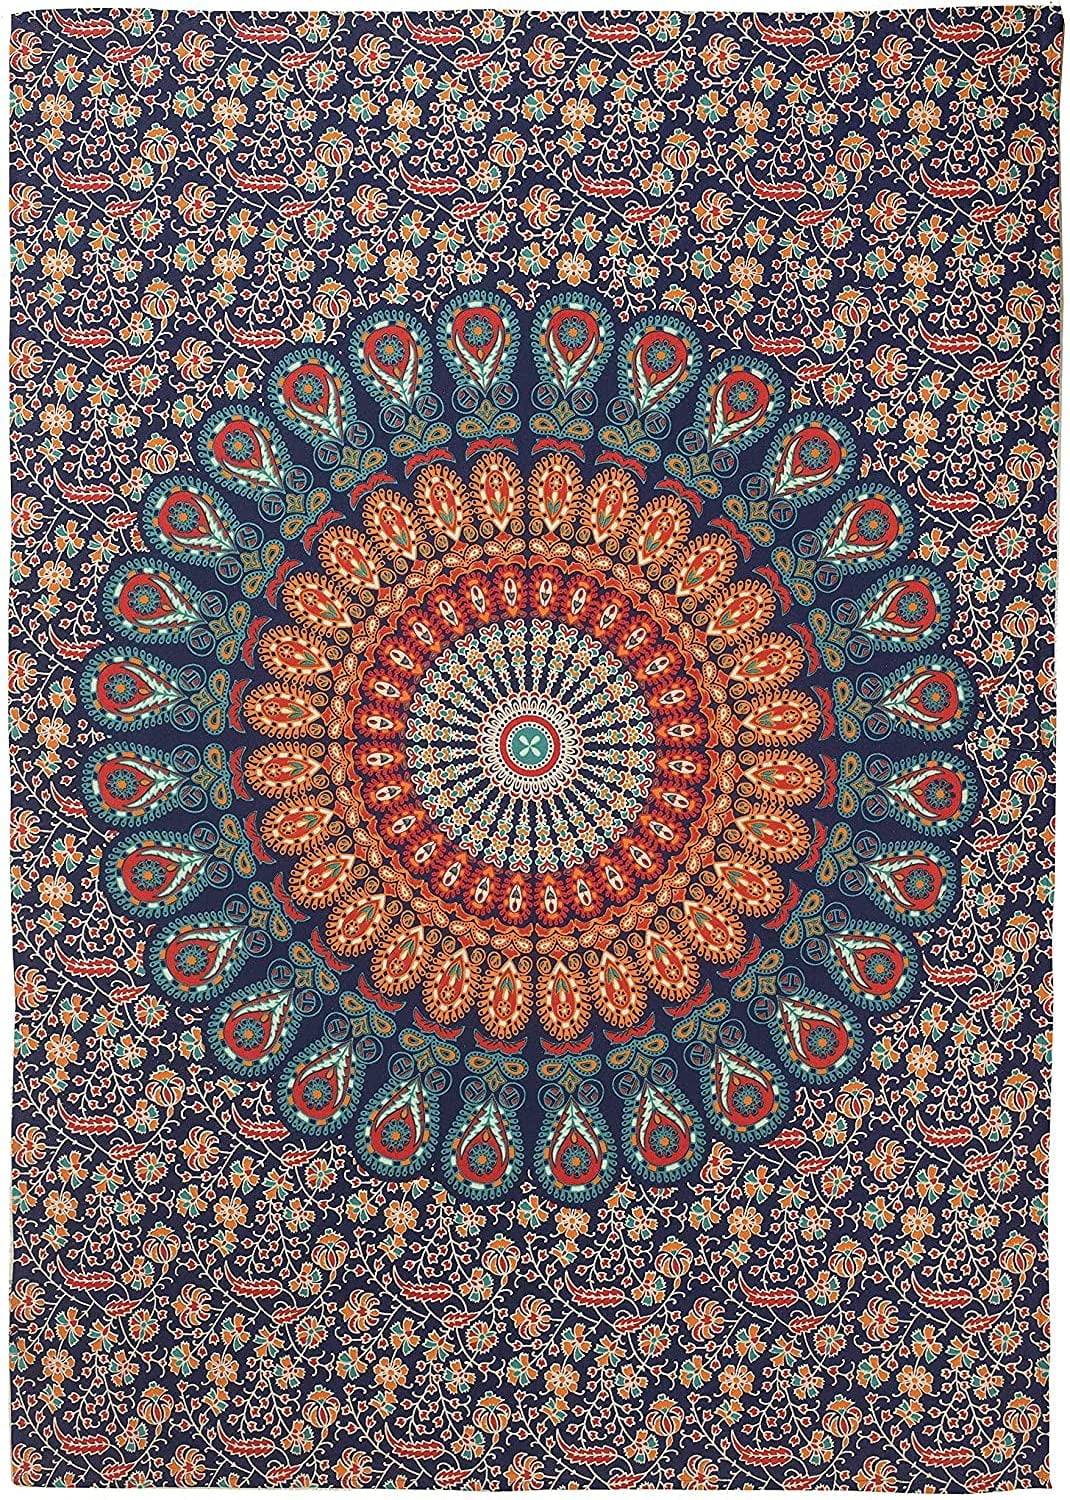 Ombre Mandala Tapestry Hippie Cotton Tapestries Psychedelic Indian  Traditional Wall Decor Tapestry Bohemian Wall Hangings Queen Size Tapestry  For Living Room Dorm Decor 